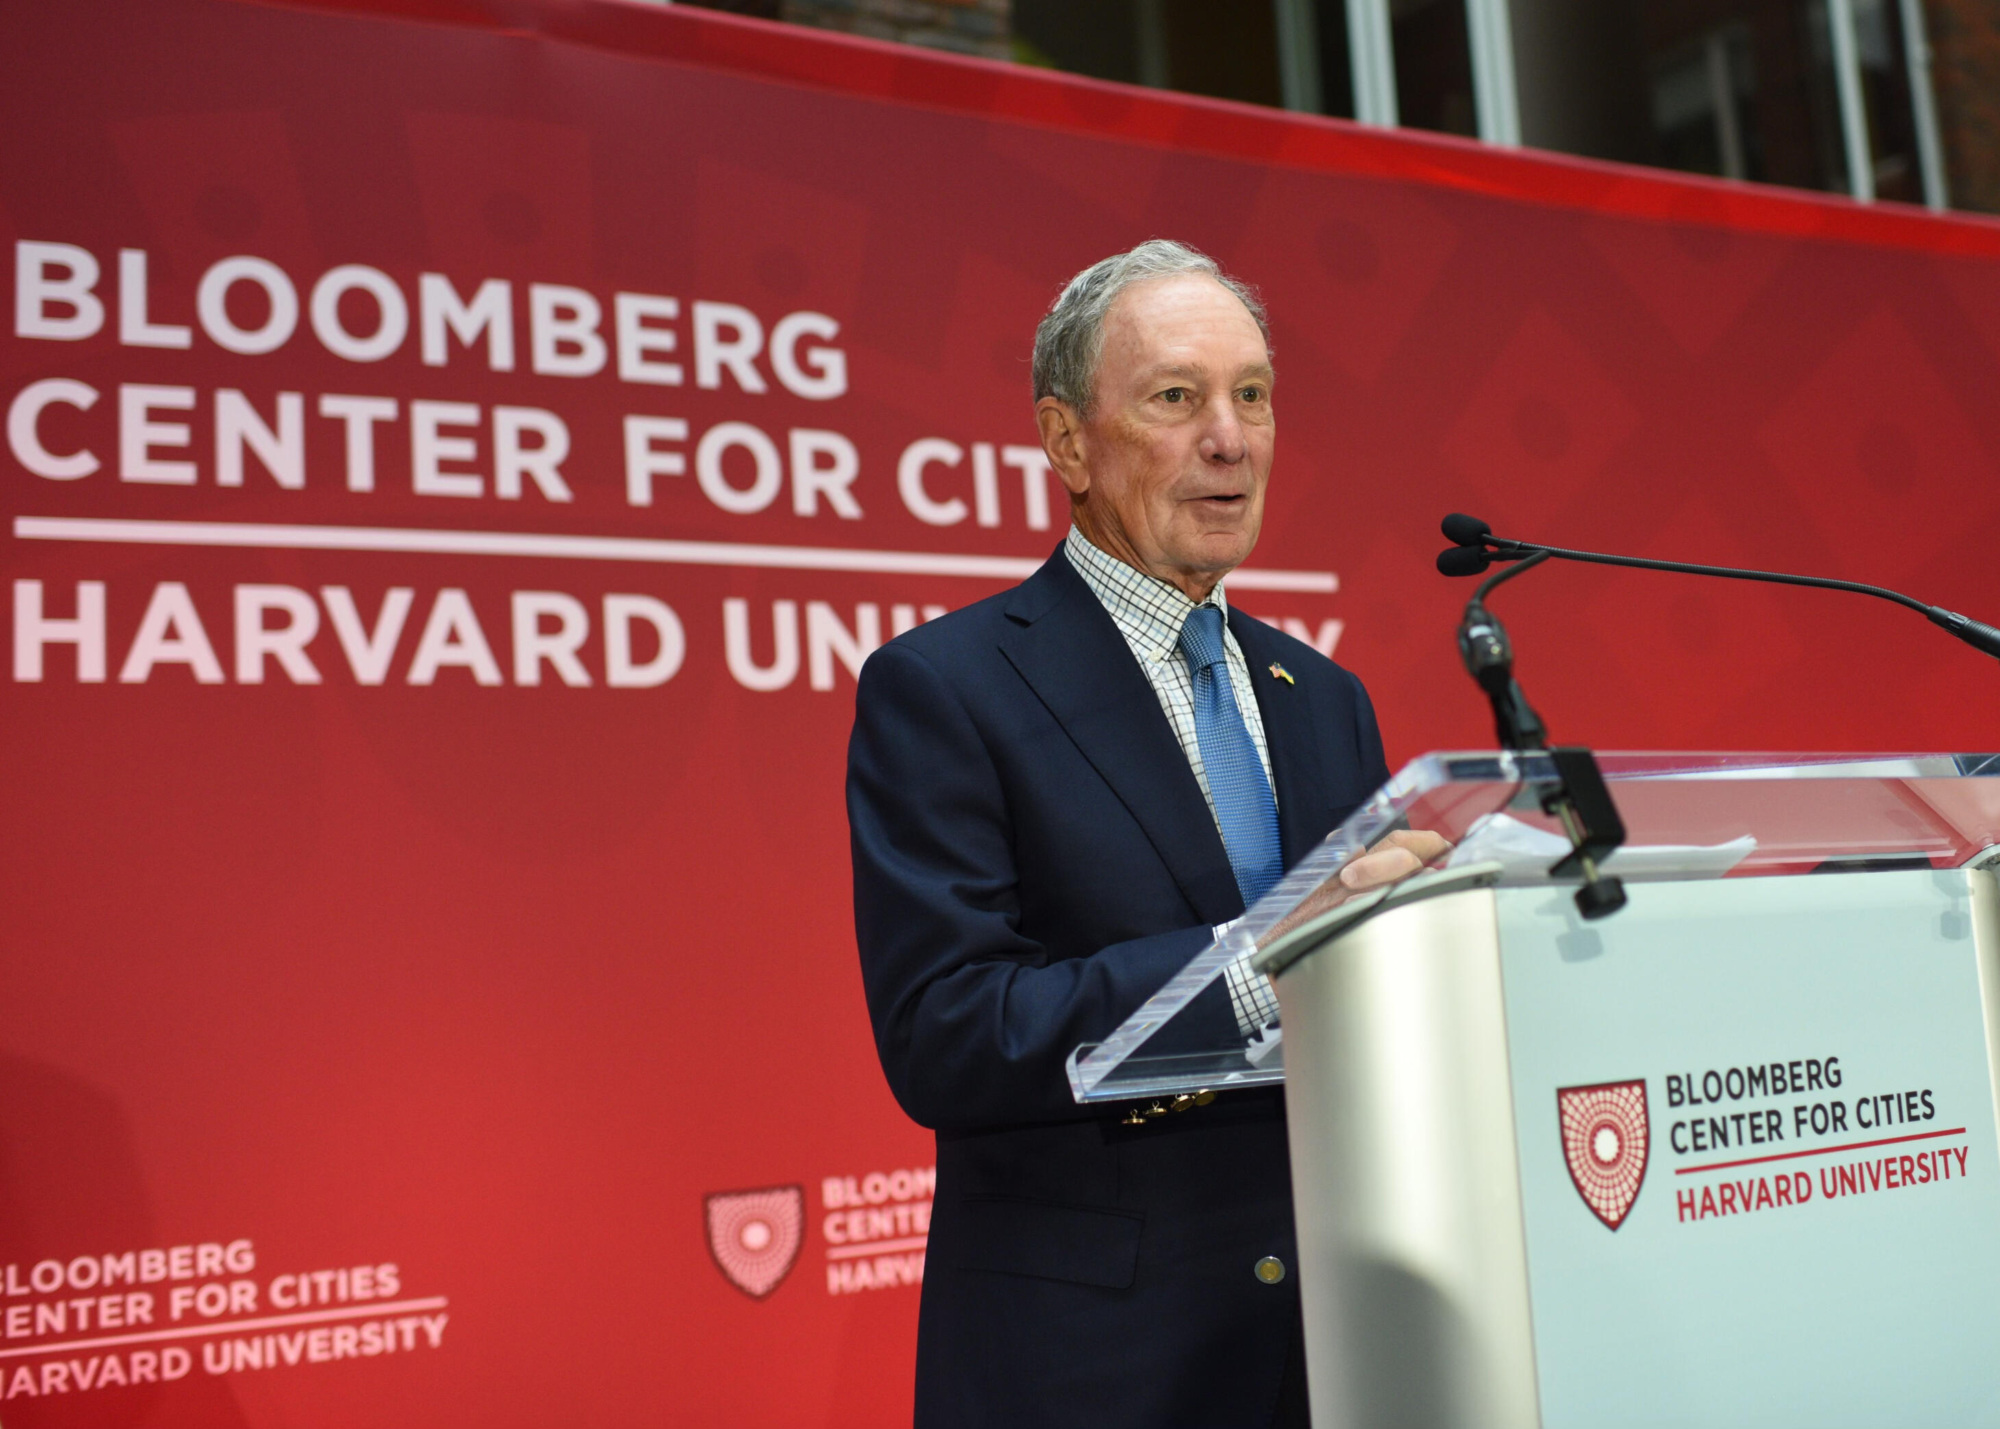 Michael Bloomberg delivers a keynote address at the opening celebration of the Bloomberg Center for Cities at Harvard University